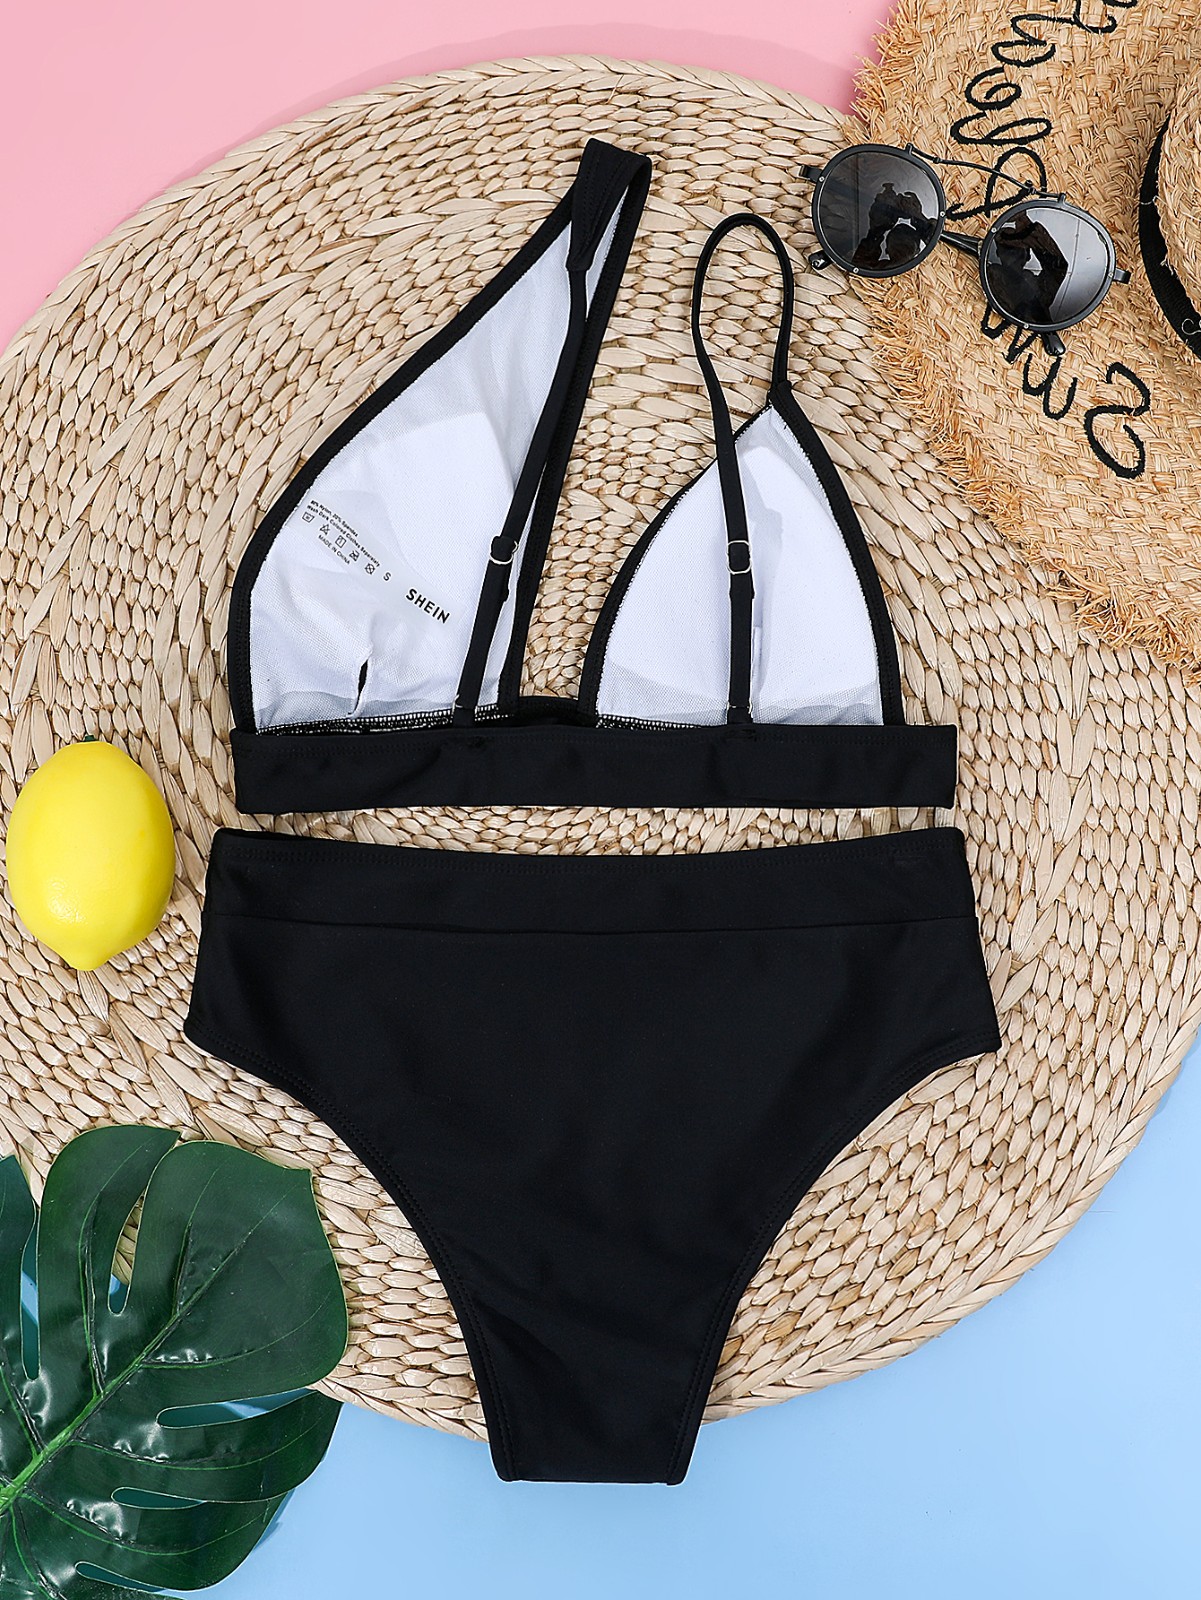 Clothing - New 2020 solid color hollow bikini high waist swimsuit women separate body sexy swimsuit